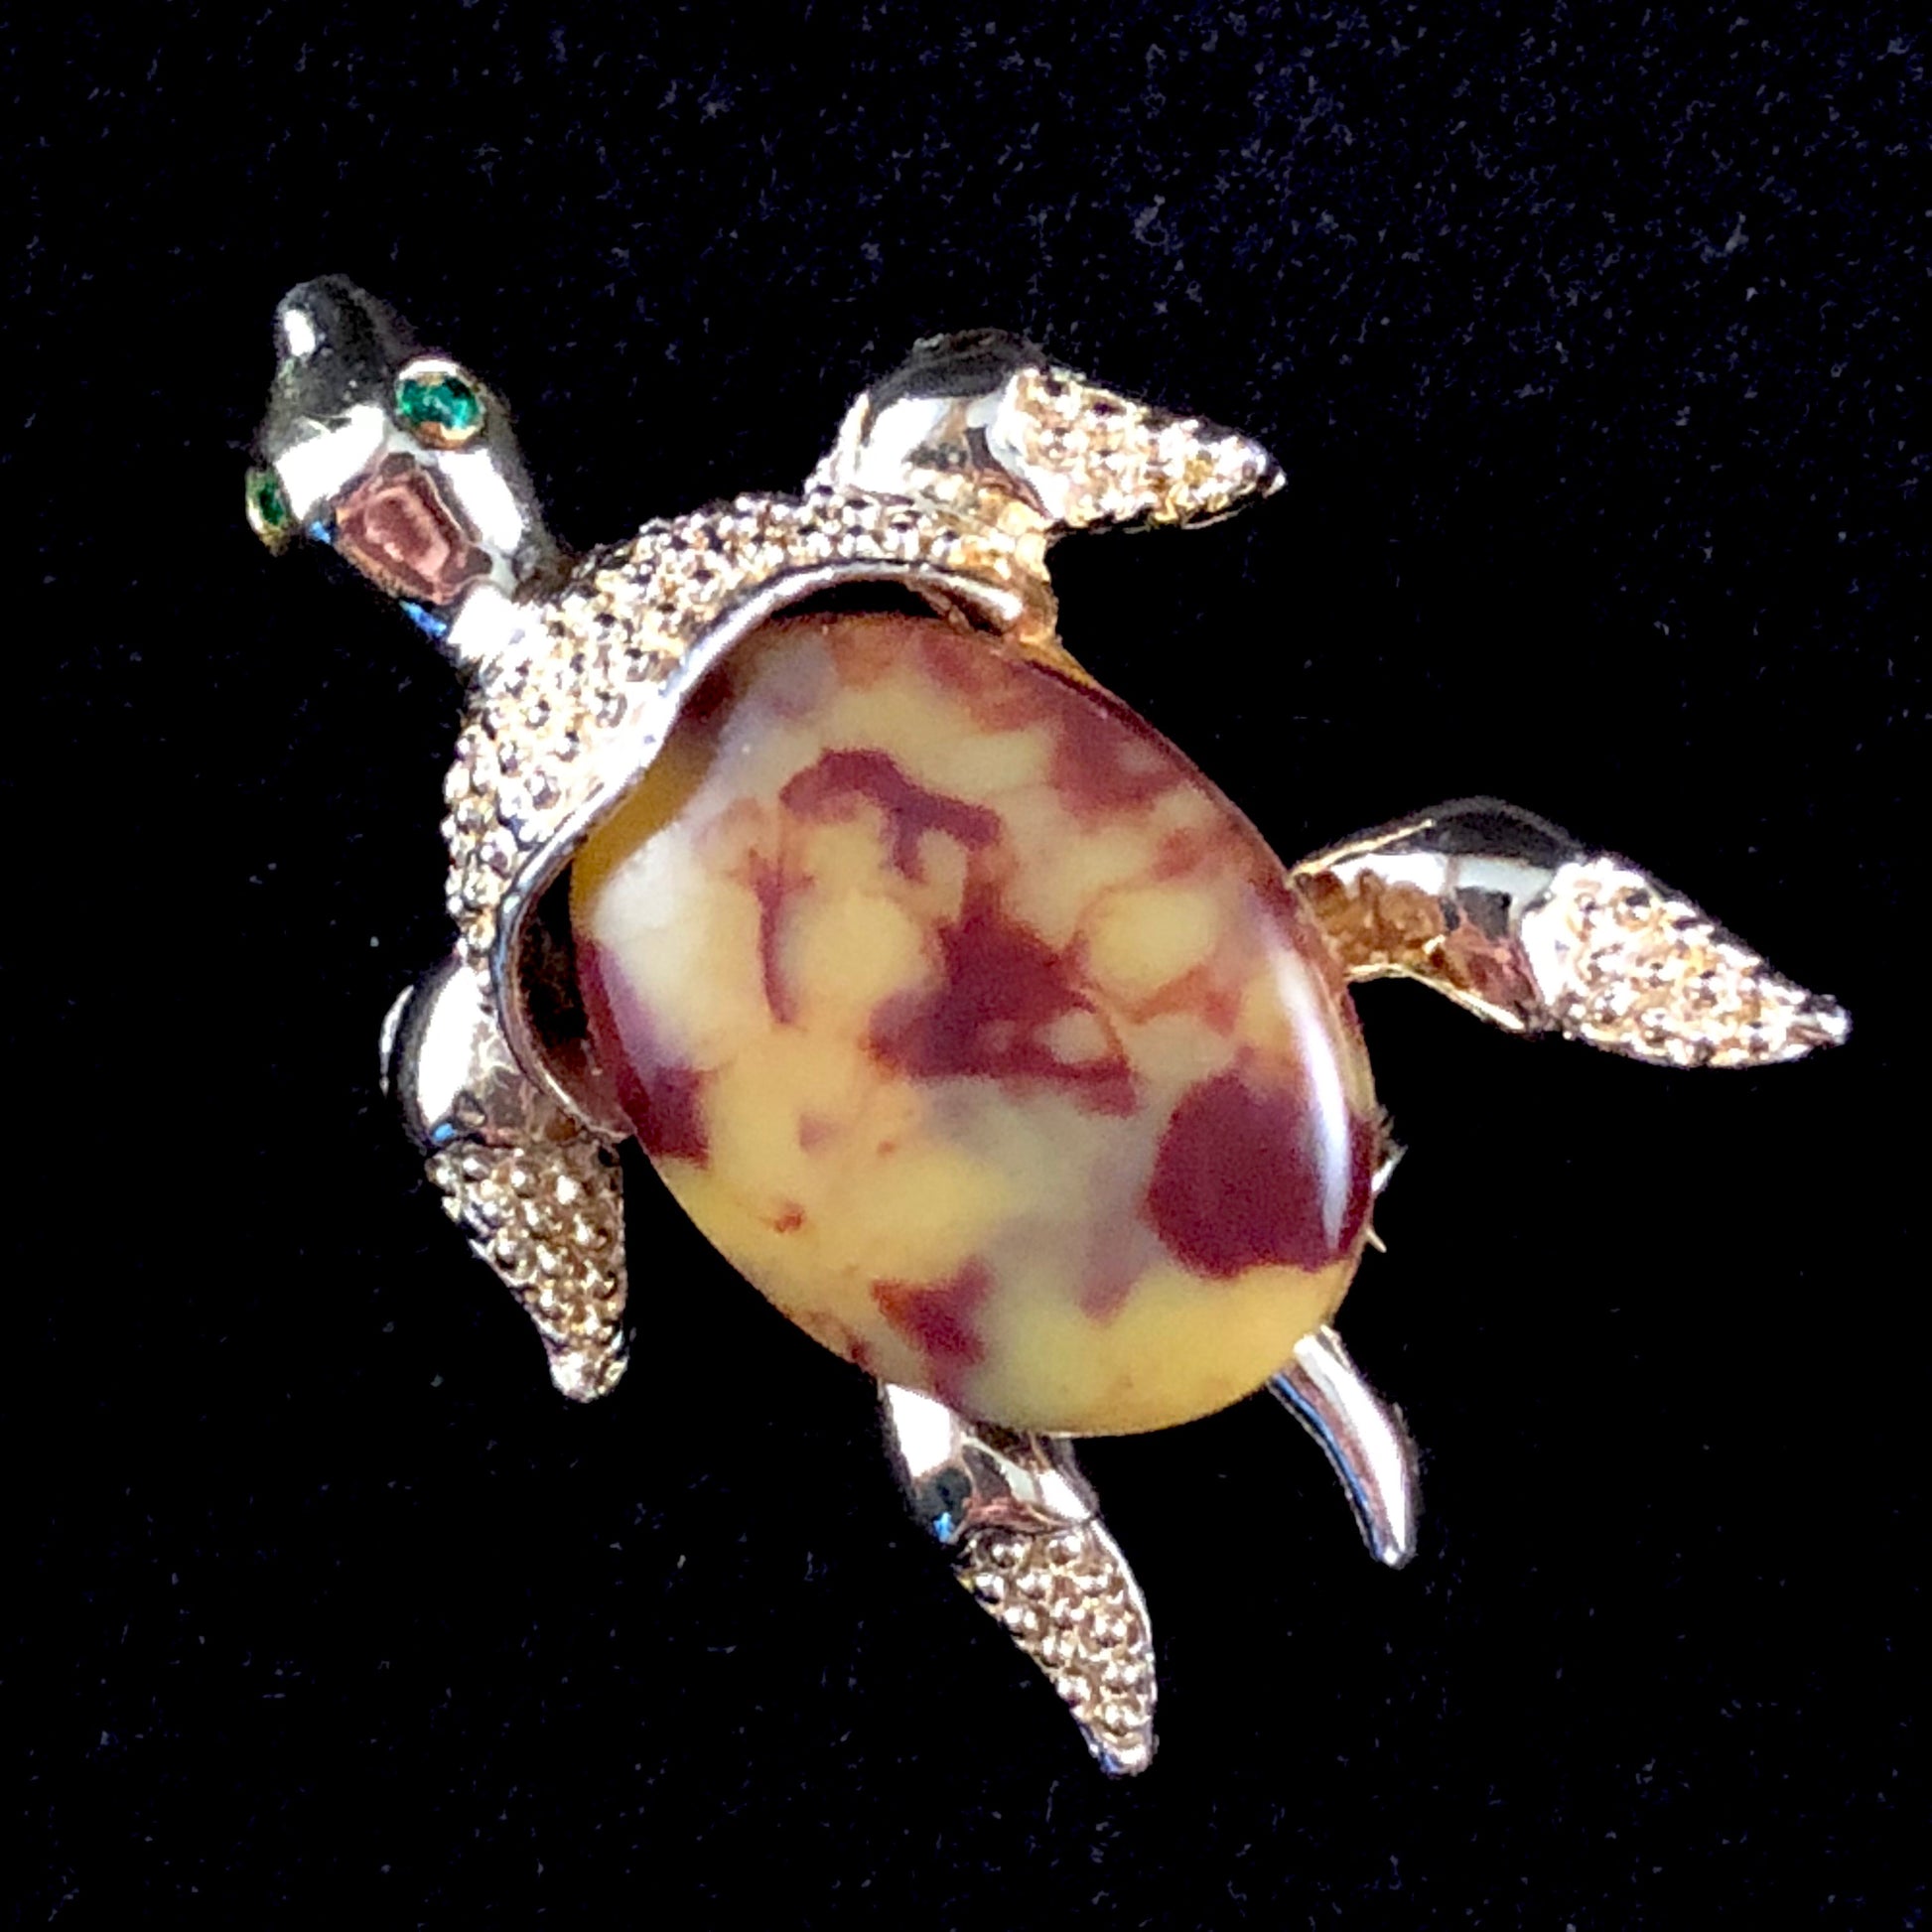 Late 60s/ Early 70s Gerry’s Stone Turtle Pin - Retro Kandy Vintage